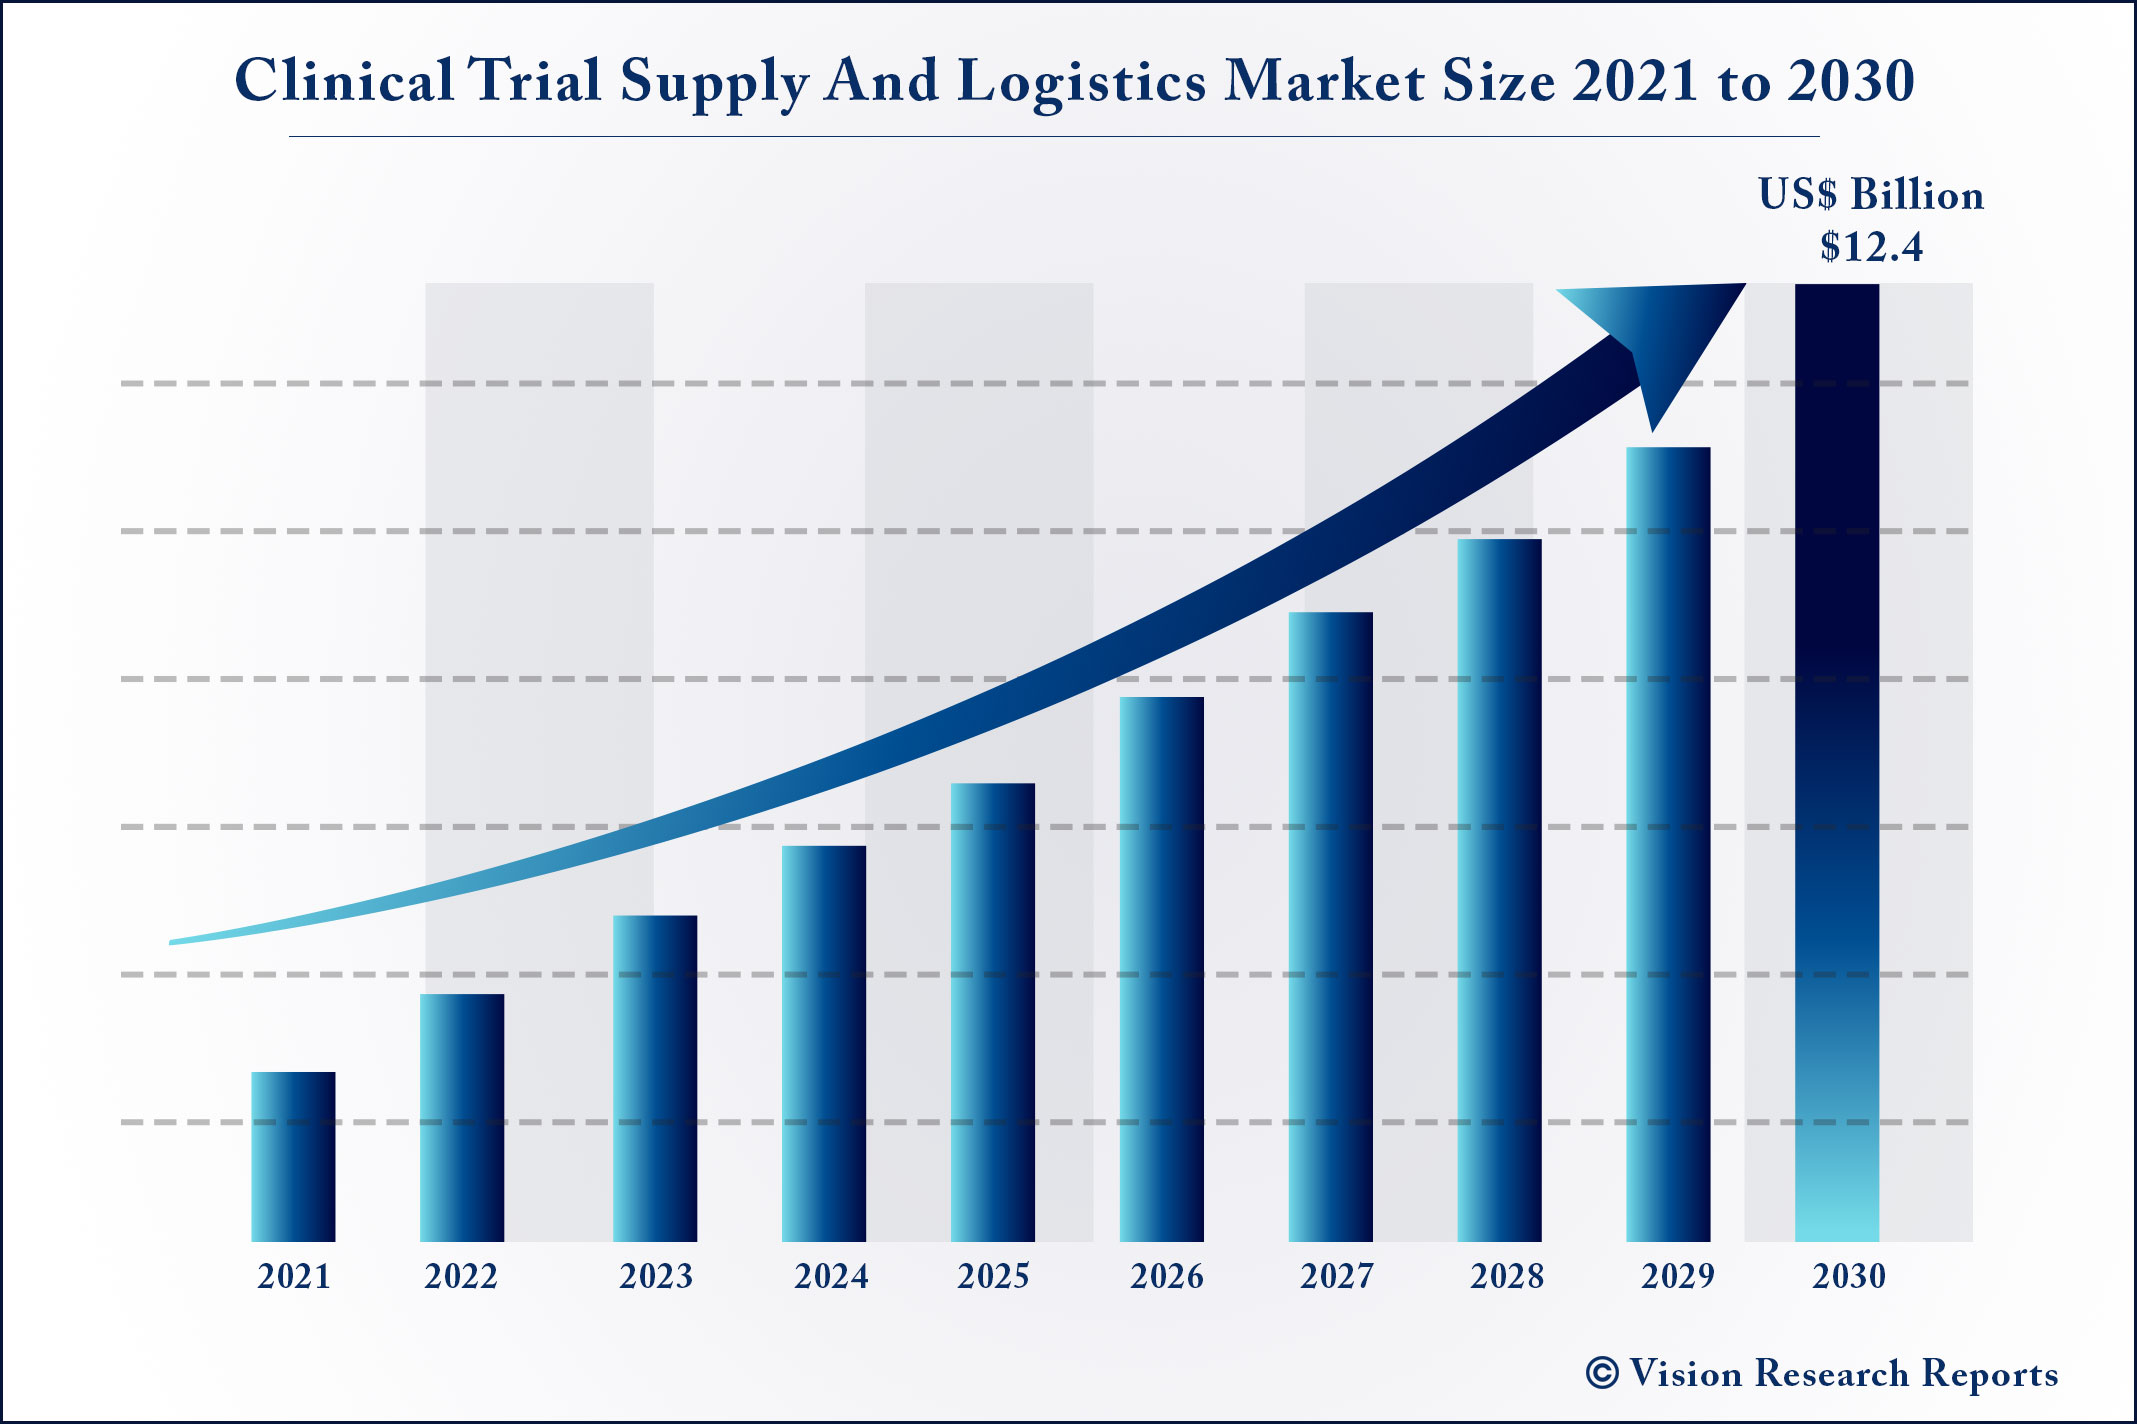 Clinical Trial Supply And Logistics Market Size 2021 to 2030